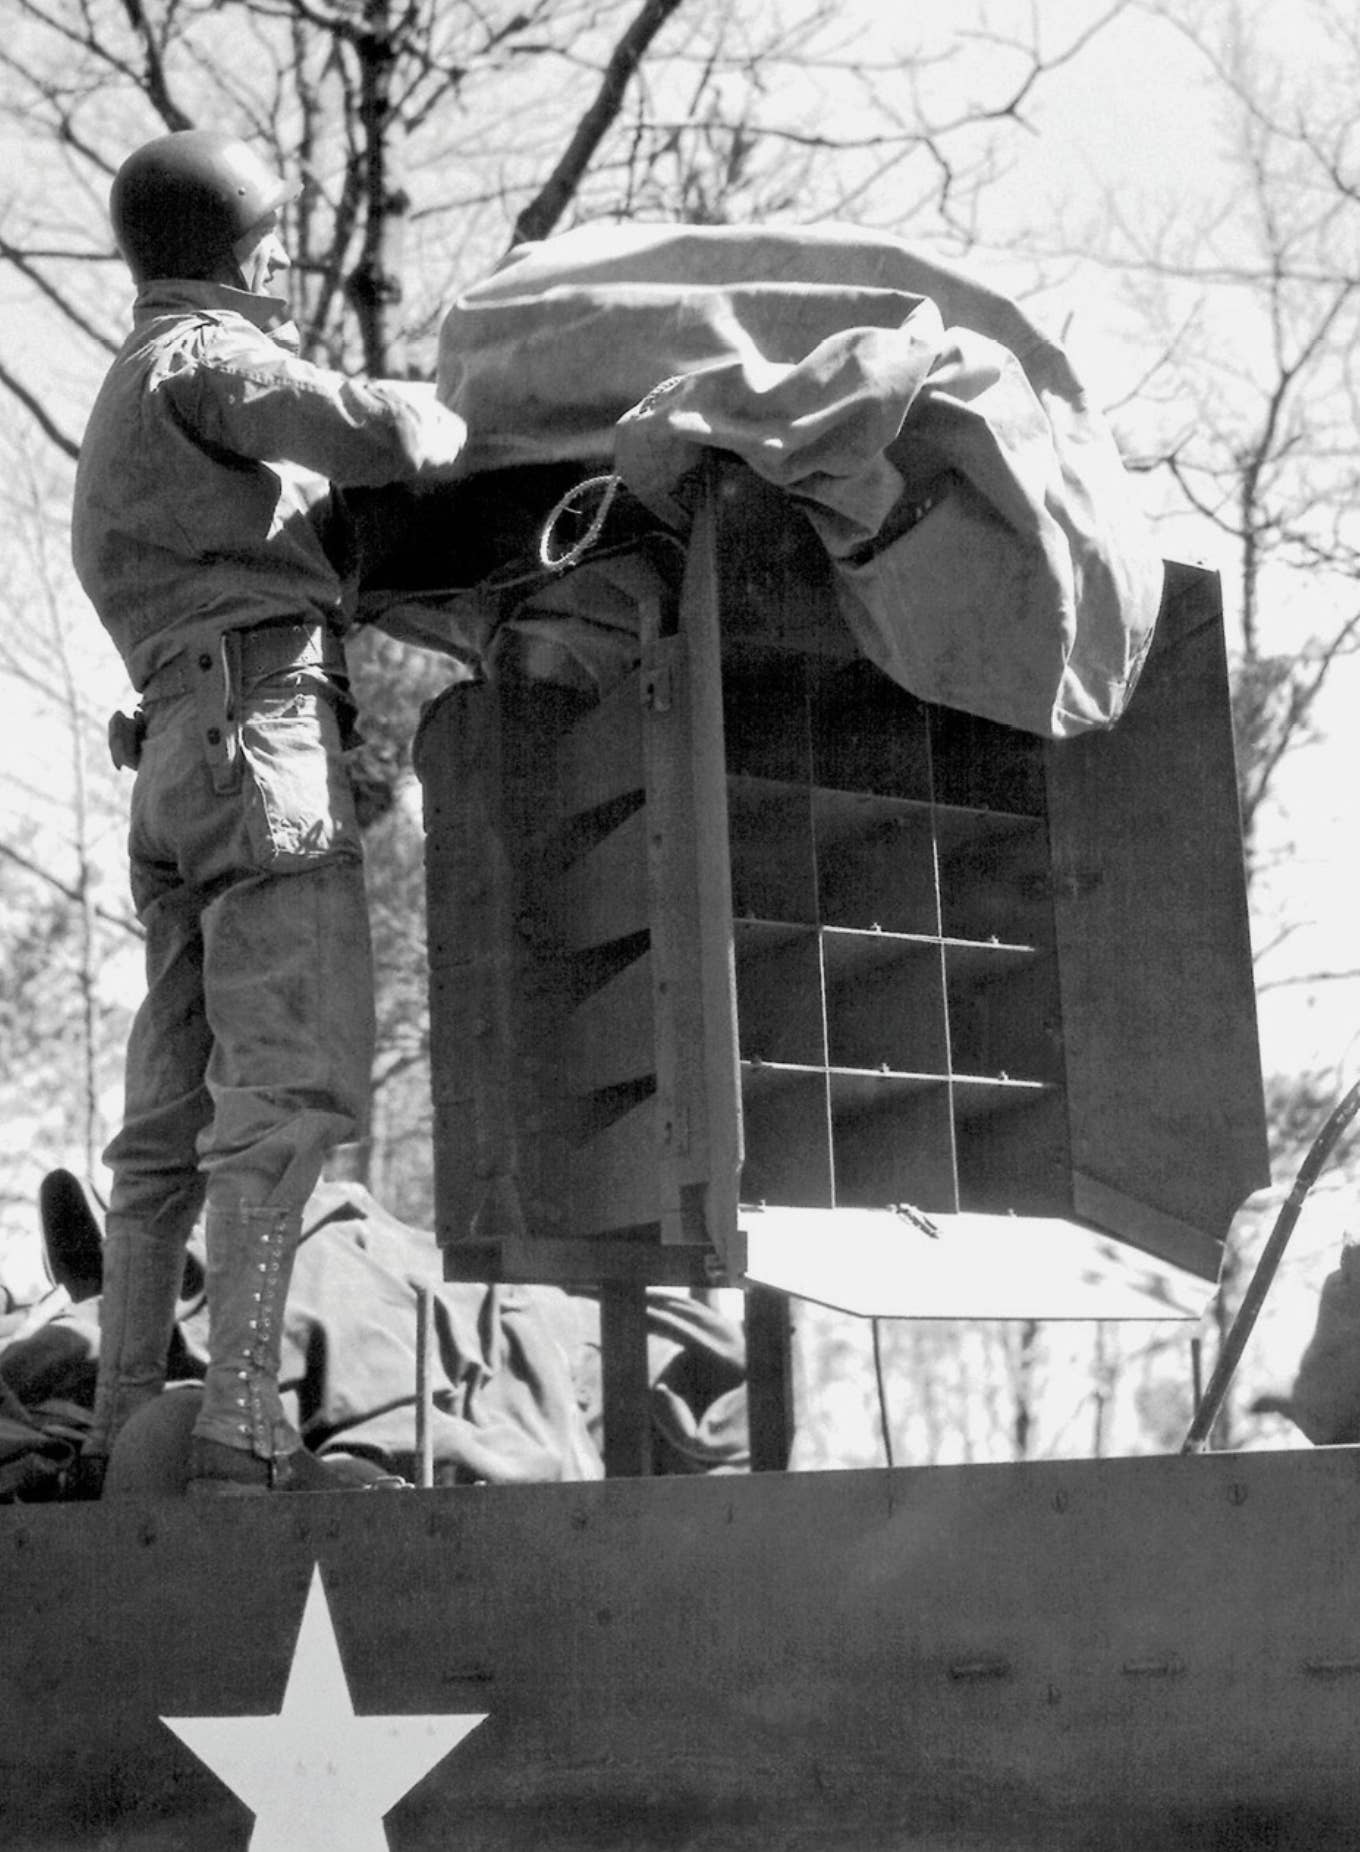 Speakers used by the 3132 Signal Service Company Special. Beyer and Sayles,<em> The Ghost Army of World War II</em>